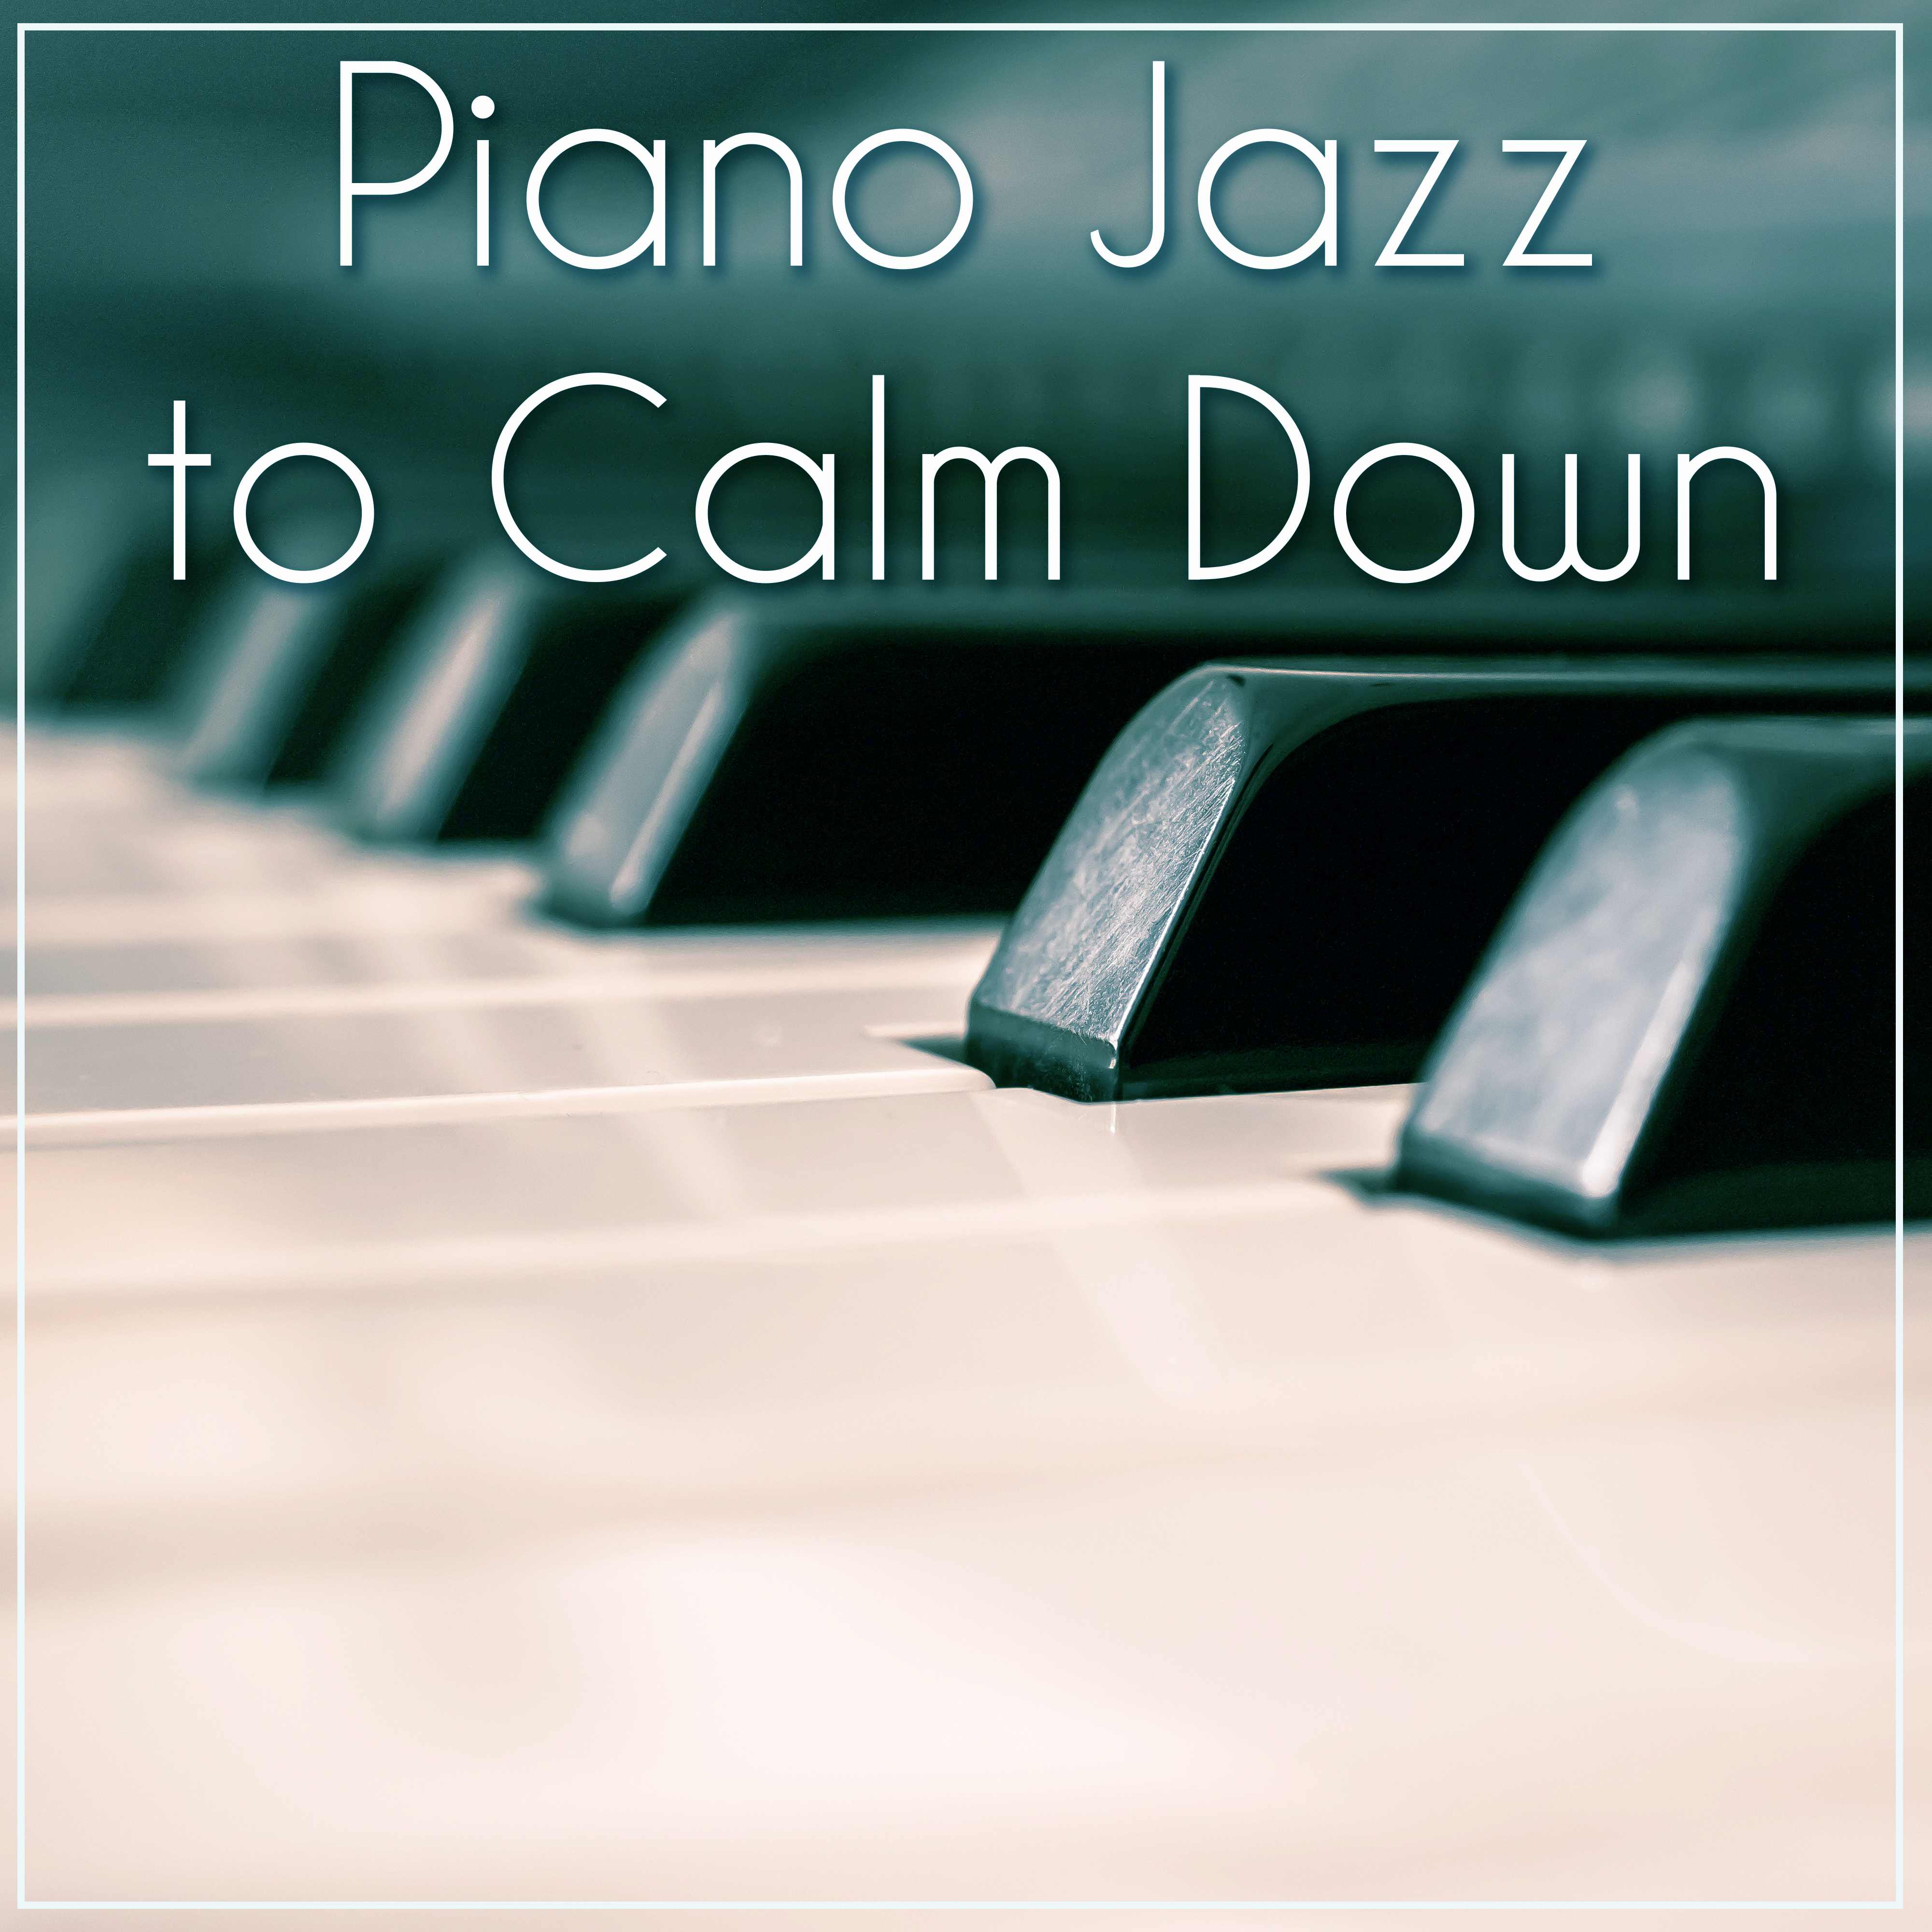 Piano Jazz to Calm Down  Relaxing Sounds, Jazz Music for Peaceful Mind, Chilled Jazz, Piano Relaxation